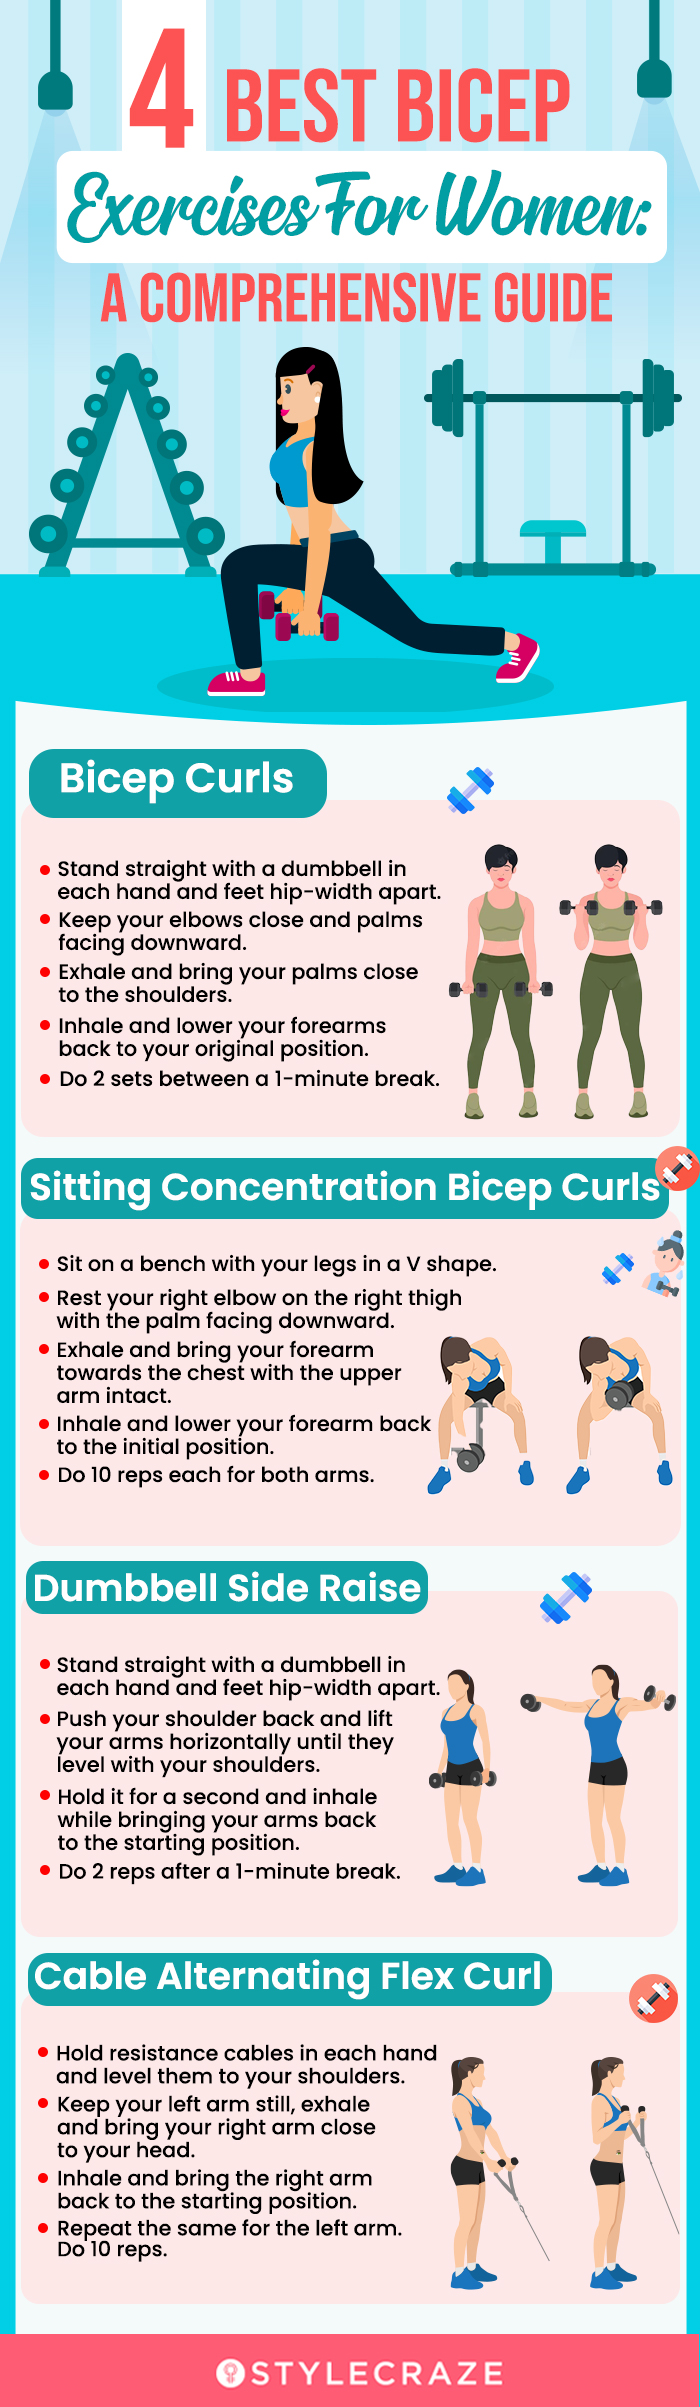 4 best bicep exercises for women (infographic)